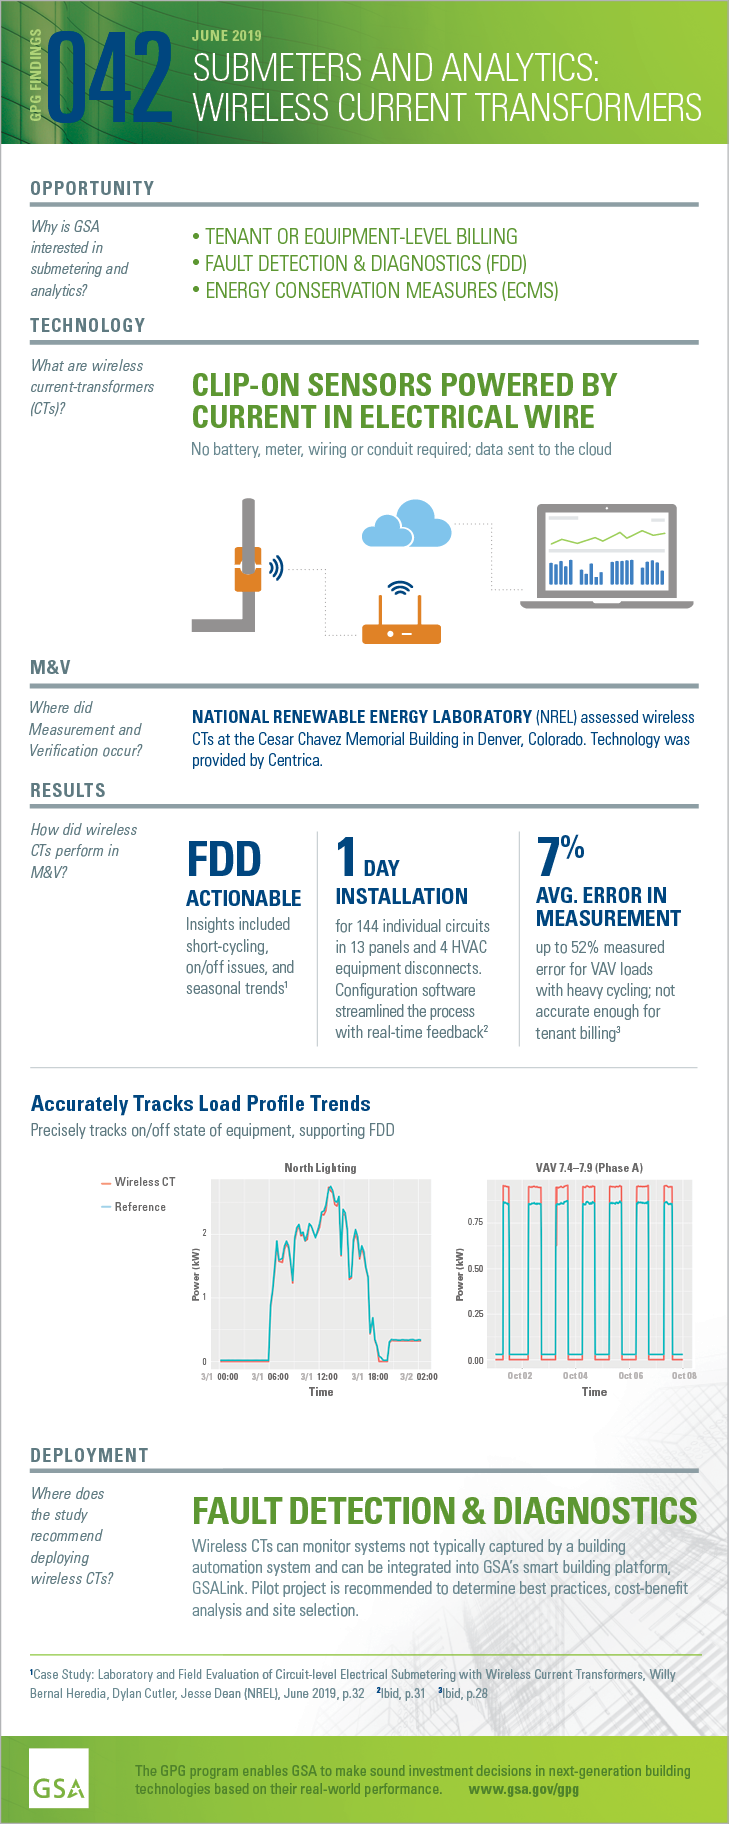 GPG Findings 042, June 2019, SUBMETERS AND ANALYTICS: WIRELESS CURRENT TRANSFORMERS  Opportunity: Why is GSA
interested in
submetering and
analytics? TENANT OR EQUIPMENT-LEVEL BILLING, FAULT DETECTION & DIAGNOSTICS (FDD), ENERGY CONSERVATION MEASURES (ECMS) Technology: What are wireless
current-transformers
(CTs)?  CLIP-ON SENSORS POWERED BY
CURRENT IN ELECTRICAL WIRE
No battery, meter, wiring or conduit required; data sent to the cloud  Measurement and Verification: Where did
Measurement and
Verification occur? NATIONAL RENEWABLE ENERGY LABORATORY (NREL) assessed wireless
CTs at the Cesar Chavez Memorial Building in Denver, Colorado. Technology was
provided by Centrica. Results: How did wireless
CTs perform in
M&V? FDD
ACTIONABLE
Insights included
short-cycling,
on/off issues, and
seasonal trends, 1 DAY
INSTALLATION
for 144 individual circuits
in 13 panels and 4 HVAC
equipment disconnects.
Configuration software
streamlined the process
with real-time feedback, 7%
AVG. ERROR IN
MEASUREMENT
up to 52% measured
error for VAV loads
with heavy cycling; not
accurate enough for
tenant billing, Accurately Tracks Load Profile Trends
Precisely tracks on/off state of equipment, supporting FDD Deployment: Where does
the study
recommend
deploying
wireless CTs?  FAULT DETECTION & DIAGNOSTICS
Wireless CTs can monitor systems not typically captured by a building
automation system and can be integrated into GSA’s smart building platform,
GSALink. Pilot project is recommended to determine best practices, cost-benefit
analysis and site selection.